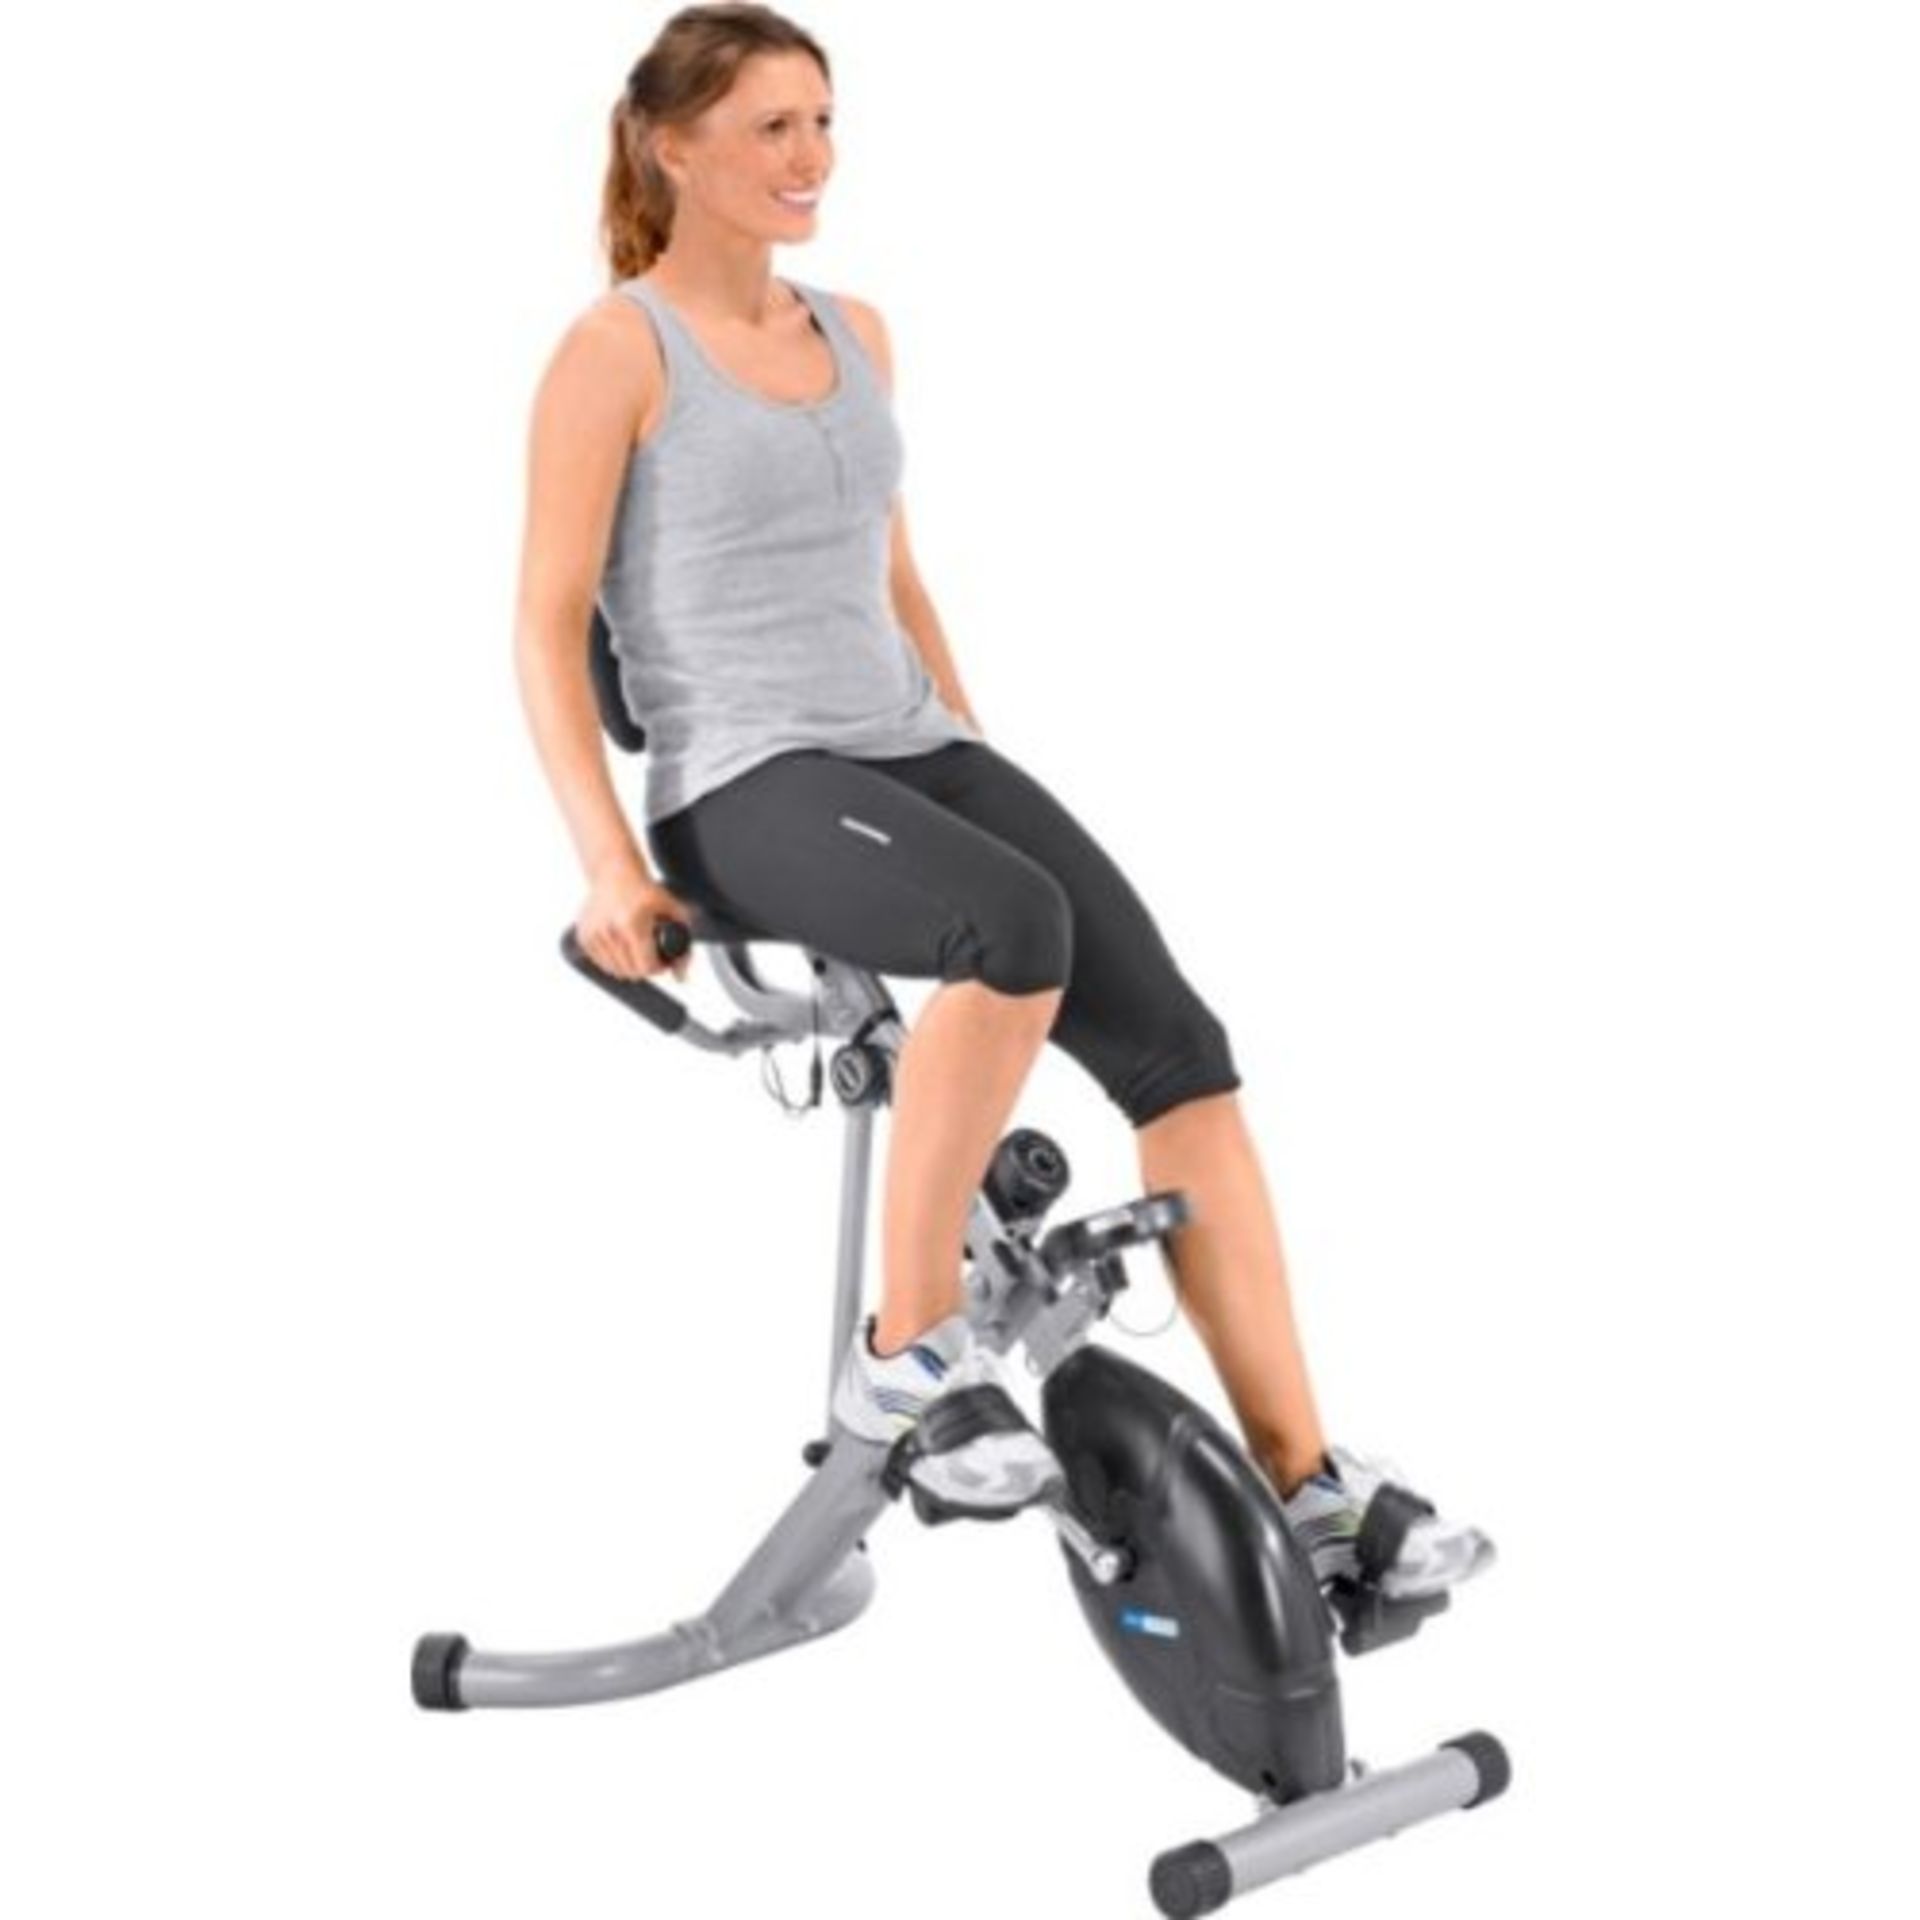 1 x Pro Fitness Recumbent Folding Exercise Bike - CL007 - Excellent Condition - Workout and Tone - Image 4 of 5